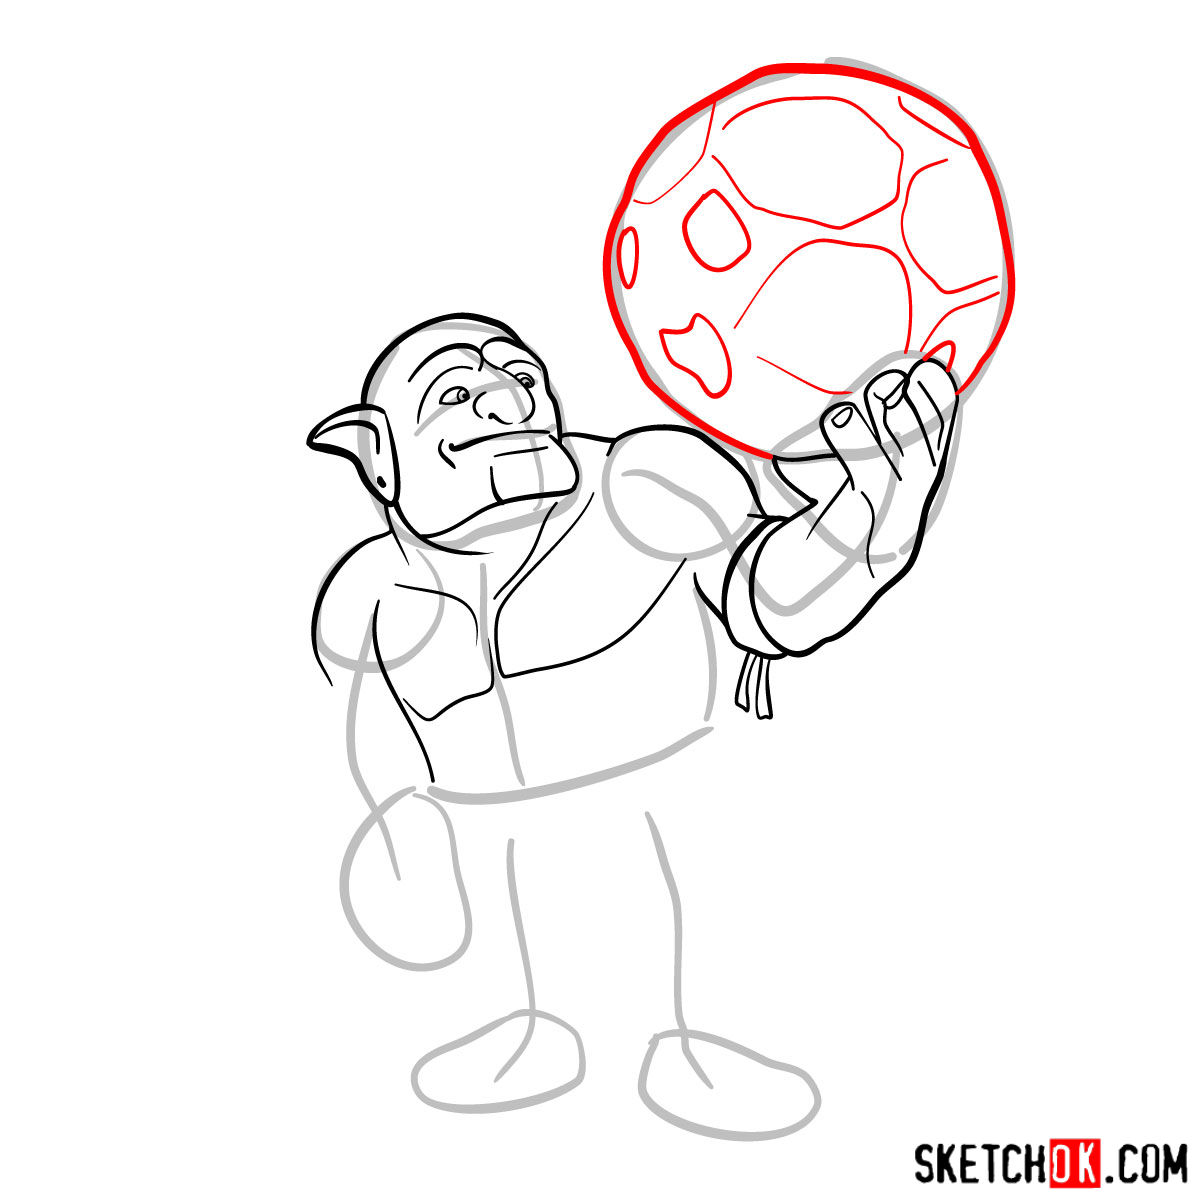 How to draw Bowler from Clash of Clans - step 05